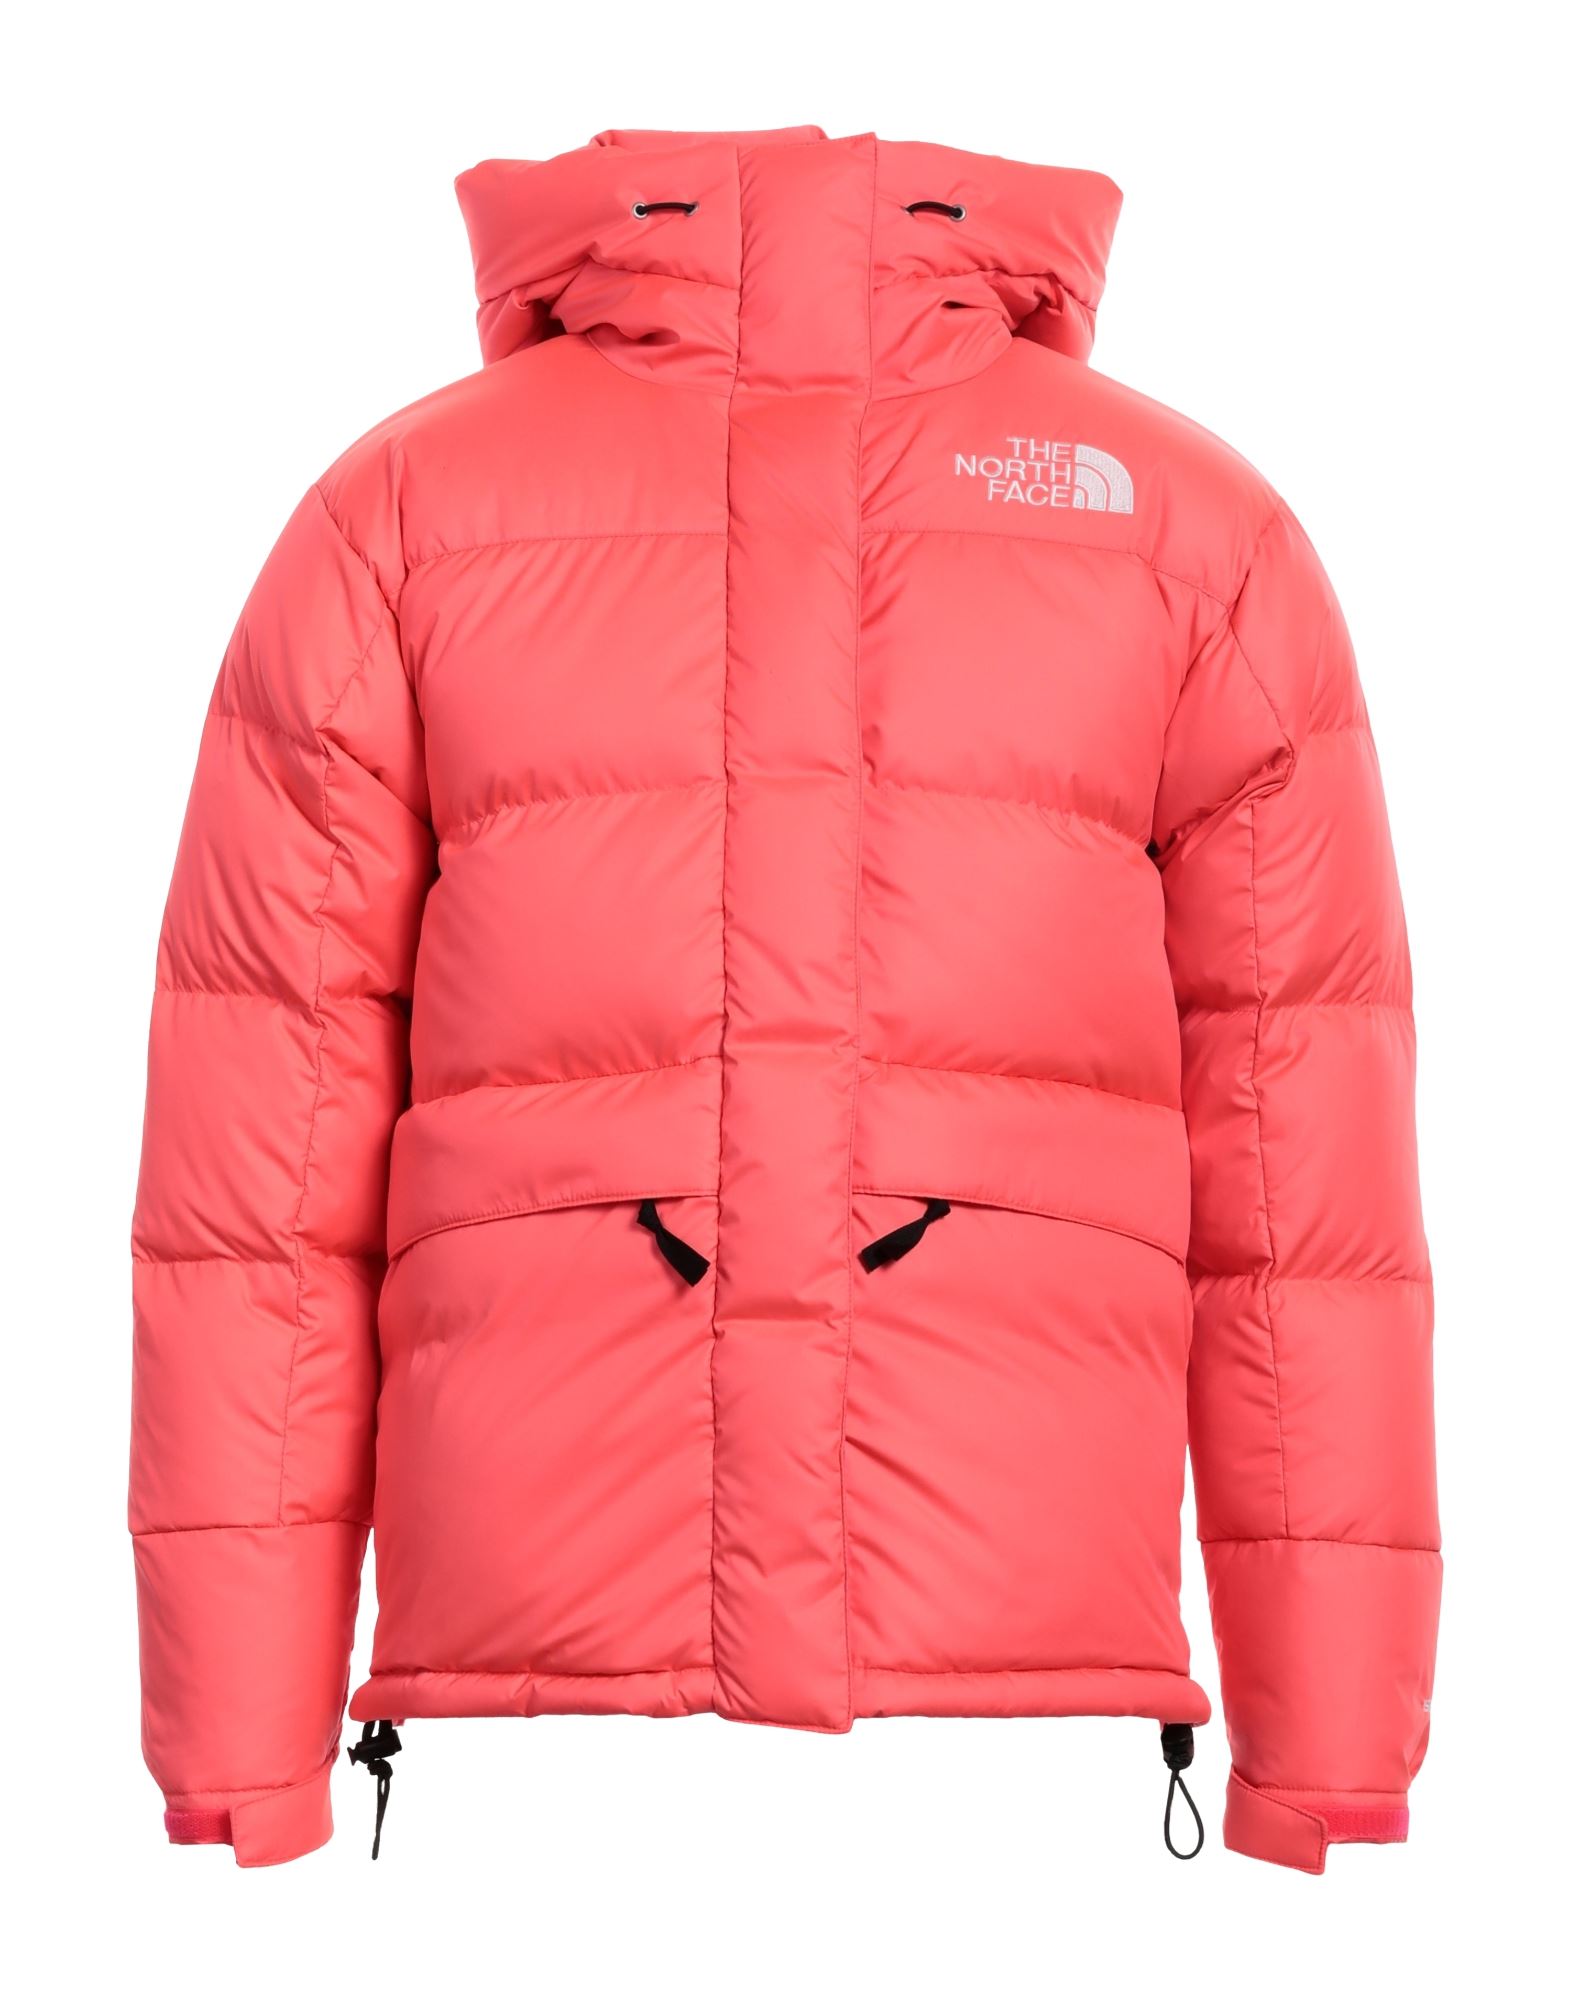 THE NORTH FACE◇HIMALAYAN PARKA_ヒマラヤンパーカ/L/ナイロン/RED